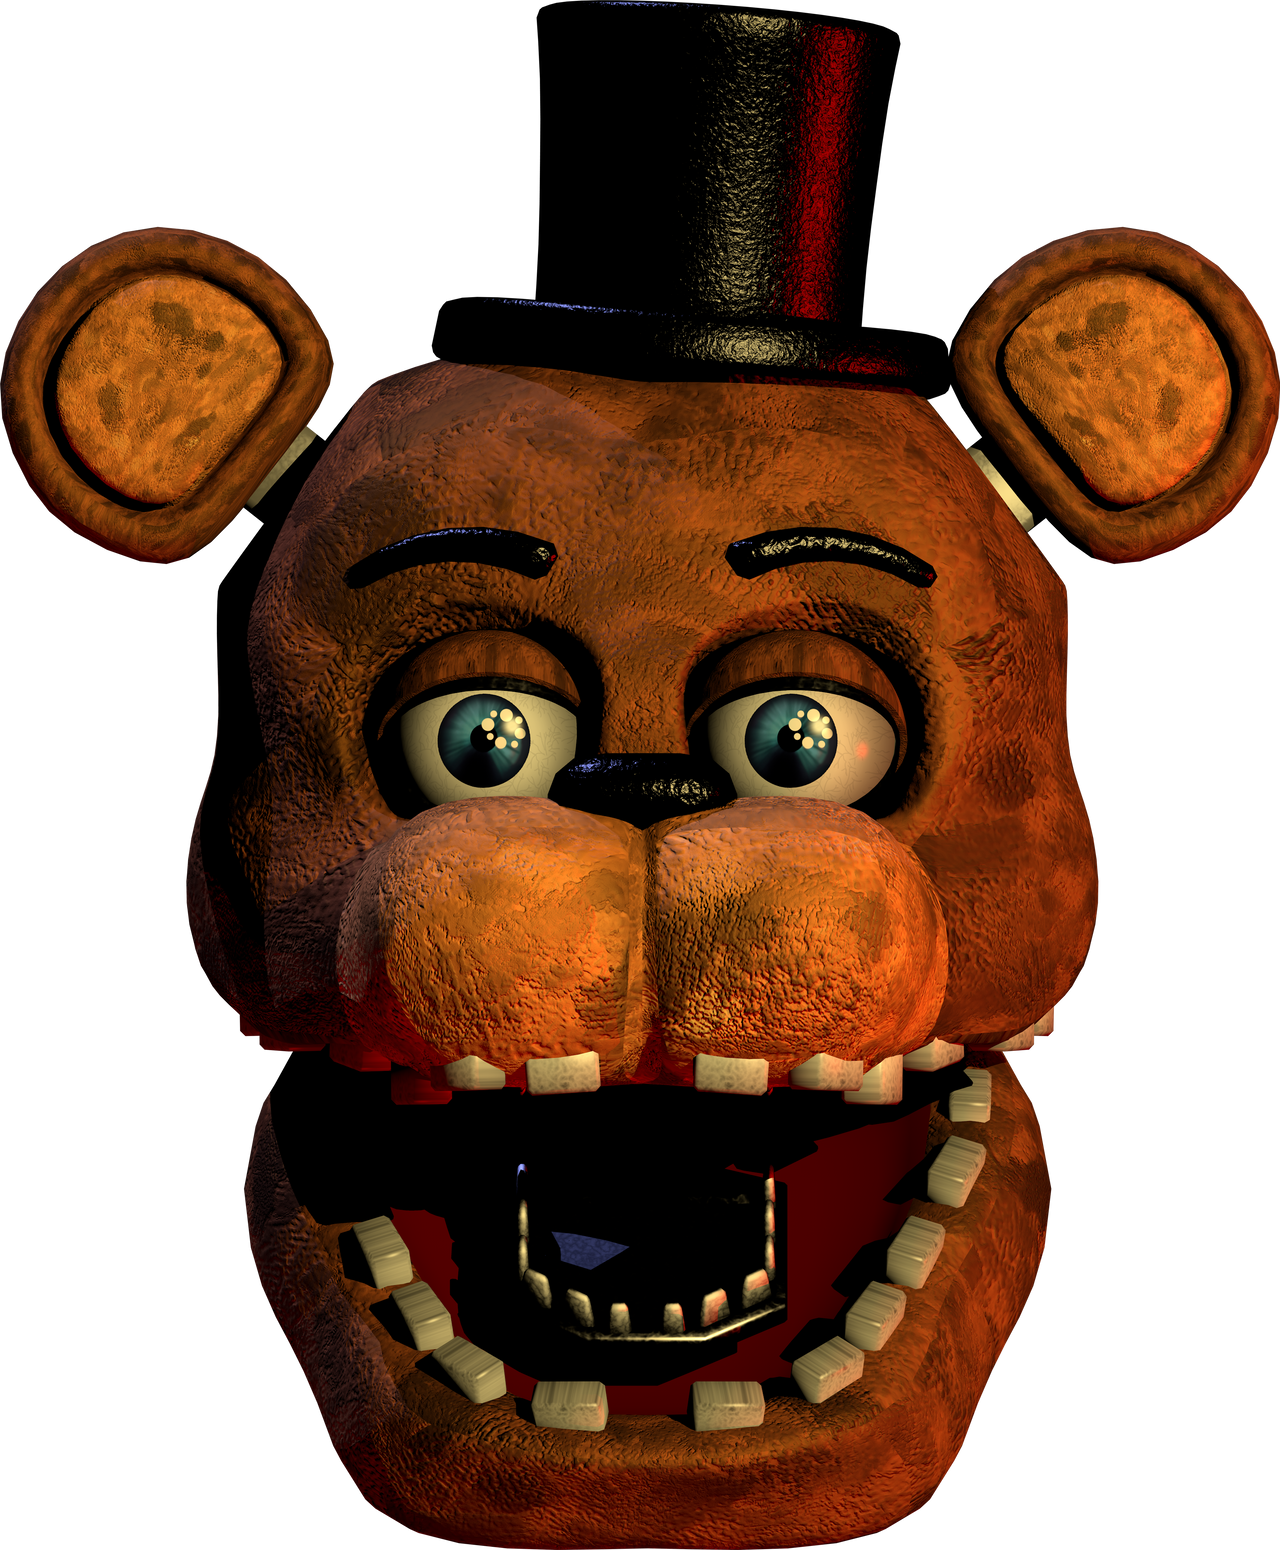 Five Nights At Freddy's 2 for the PS2 by Salmon55 on DeviantArt